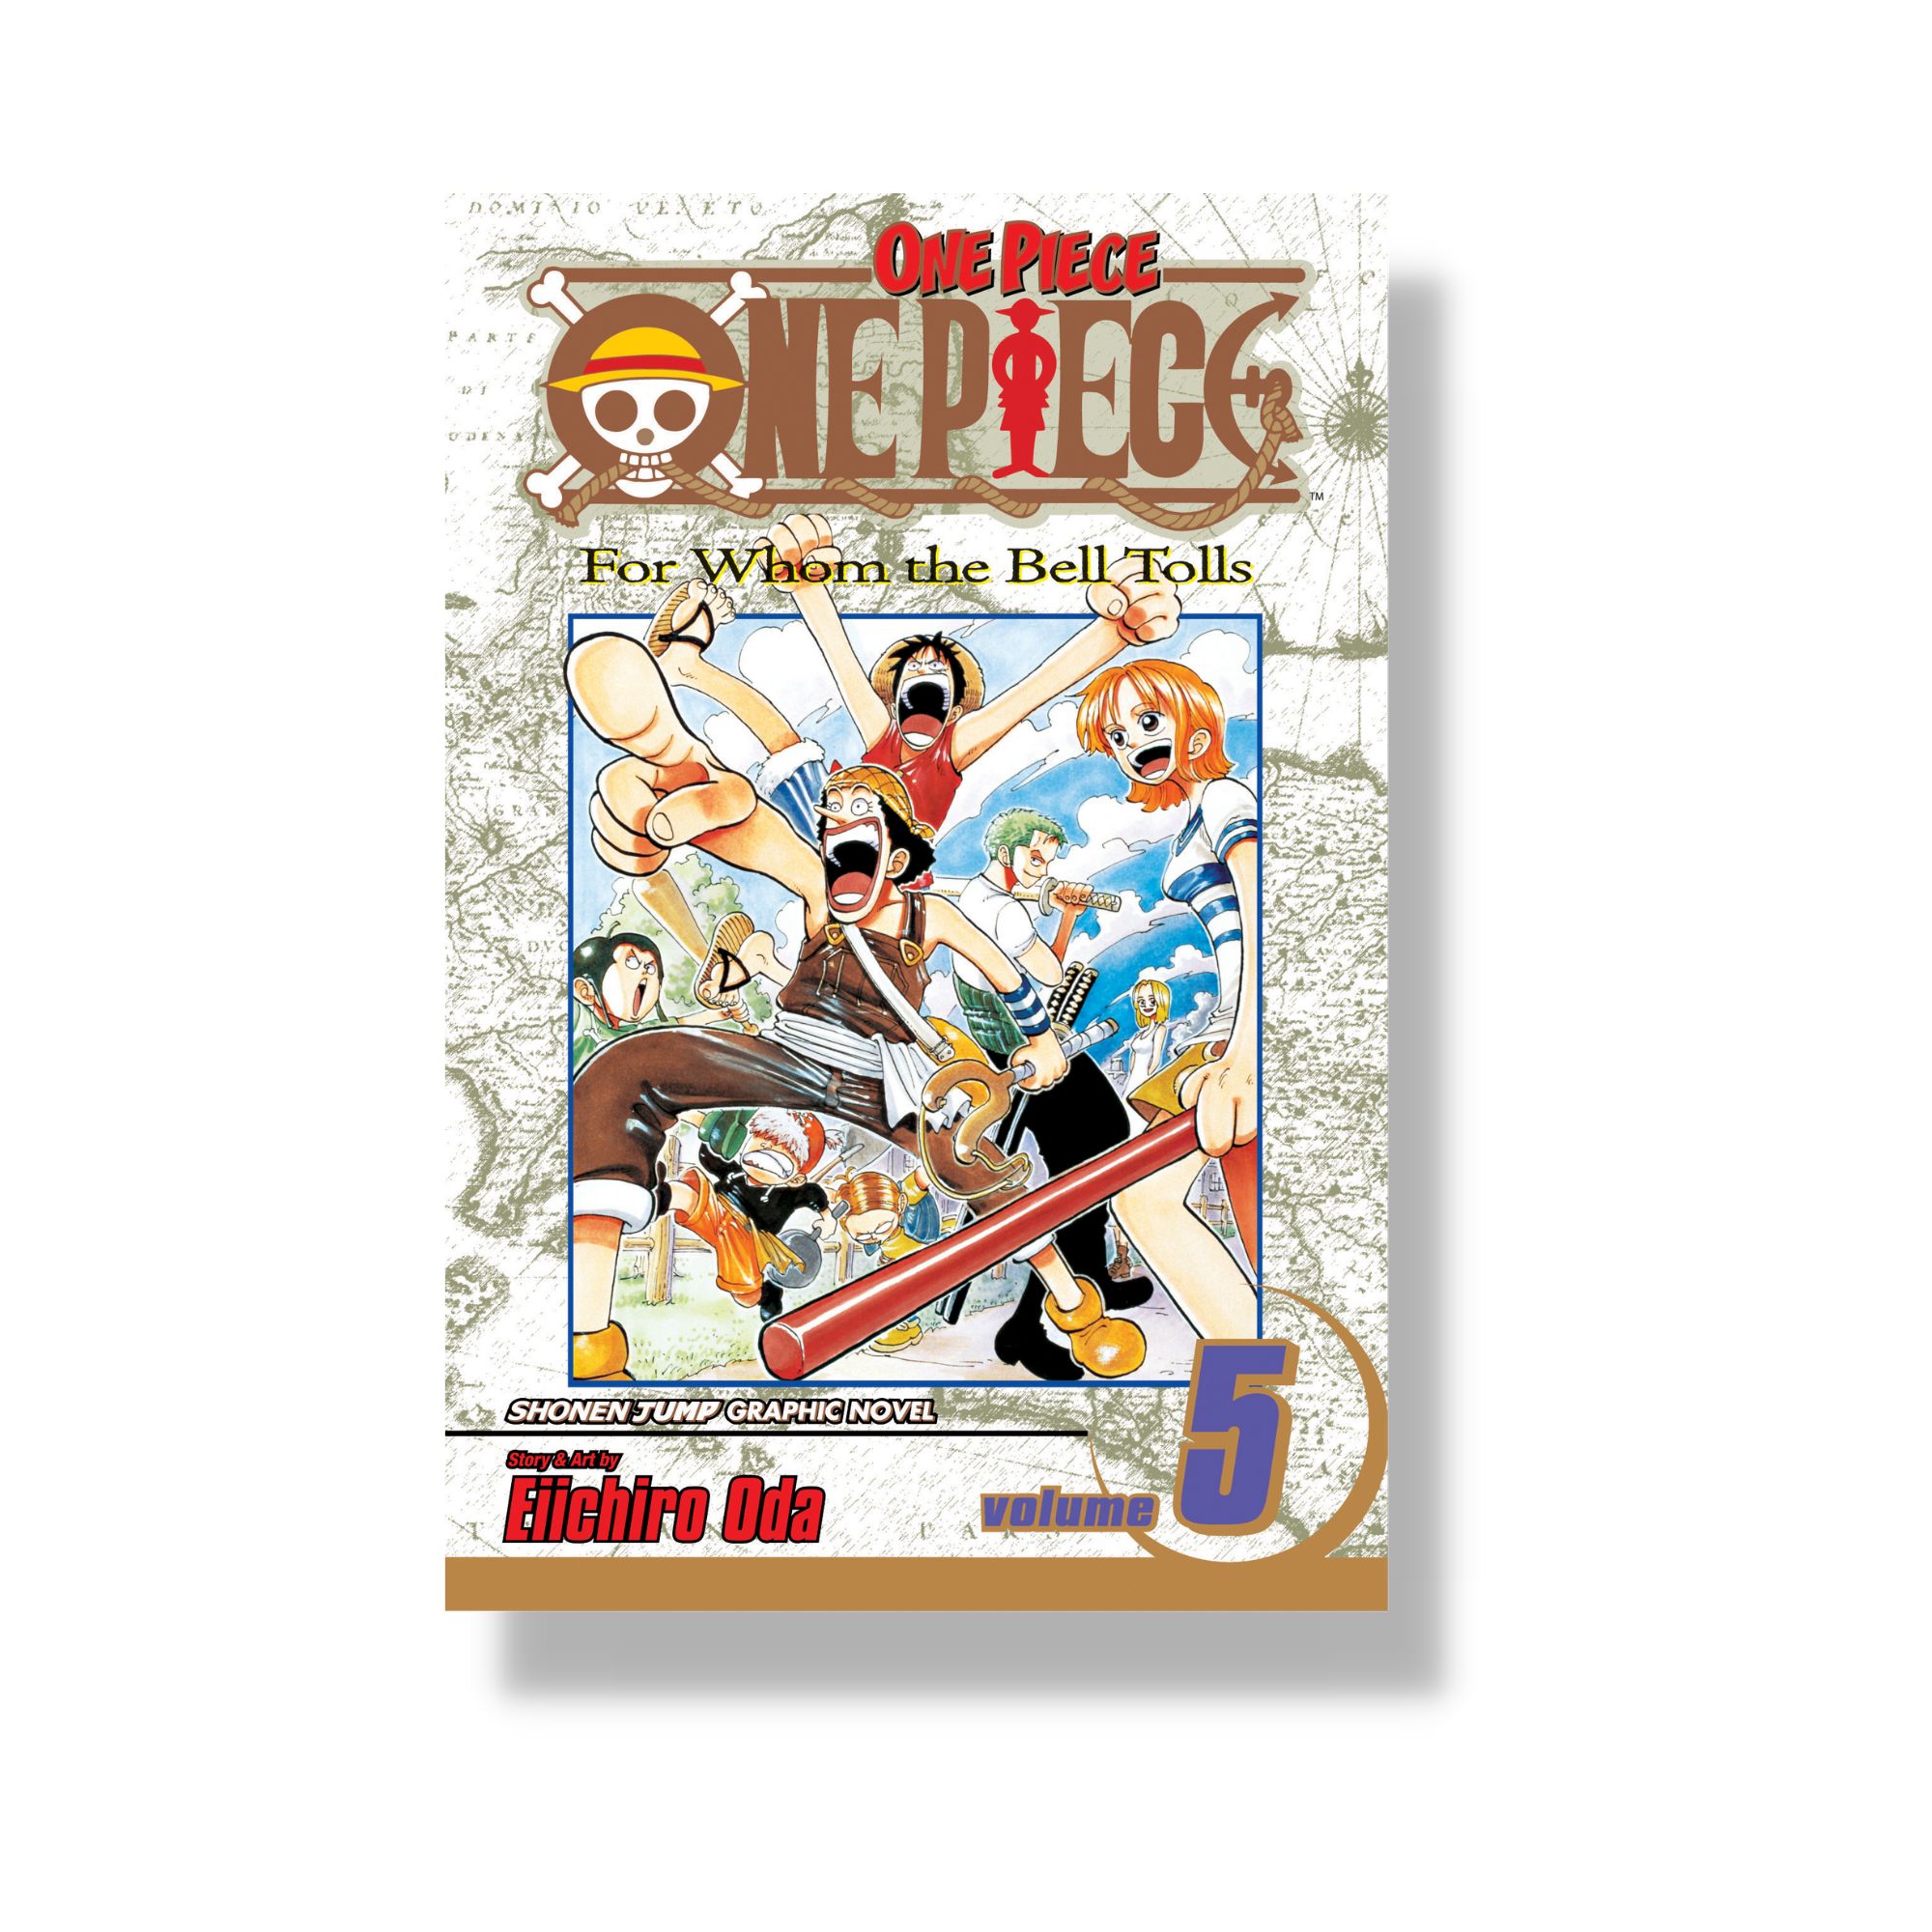 One Piece: East Blue 1-2-3